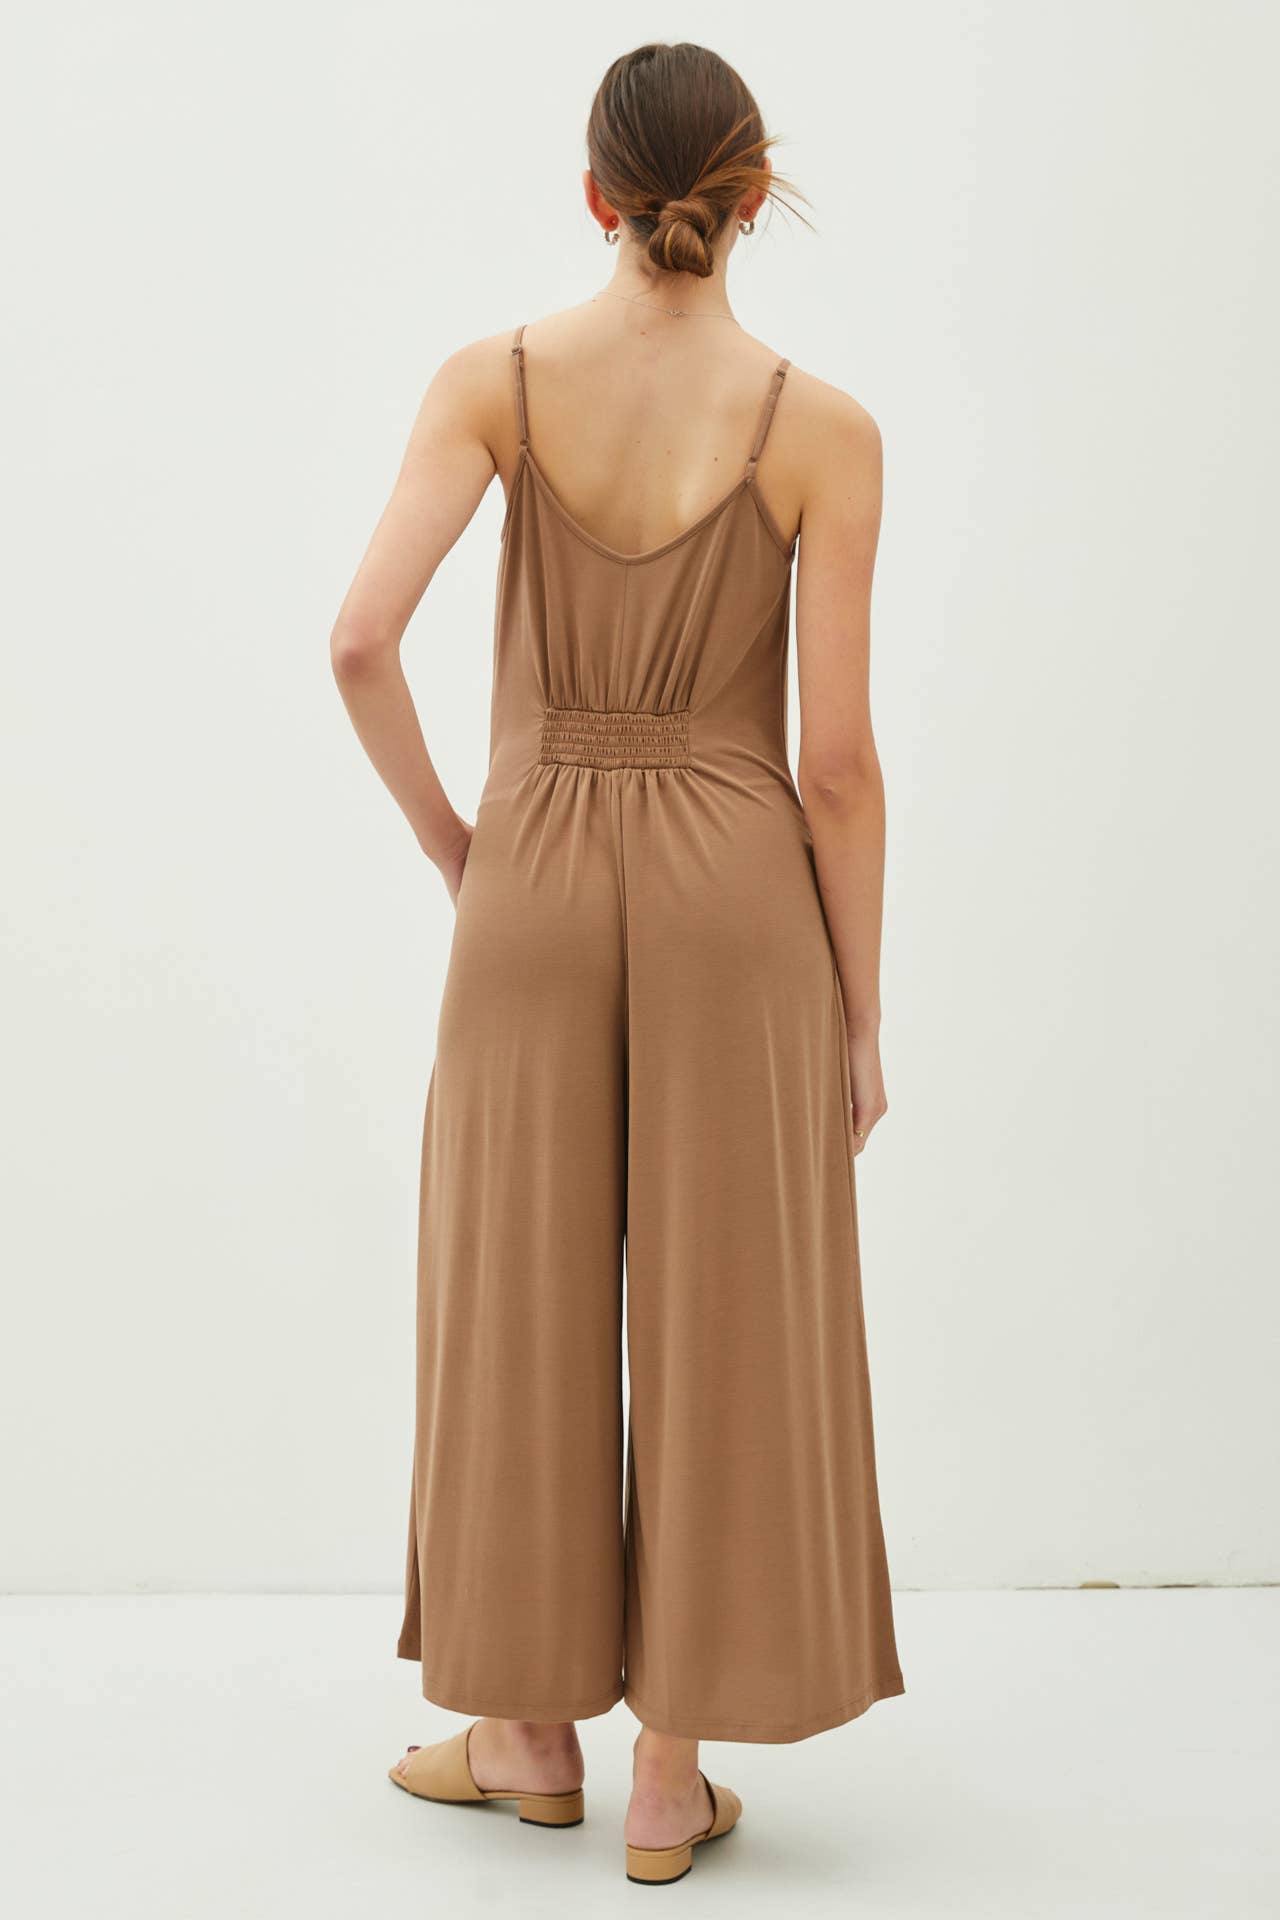 Jaime - MODAL JERSEY WIDE LEG BABYDOLL JUMPSUIT by Be Cool